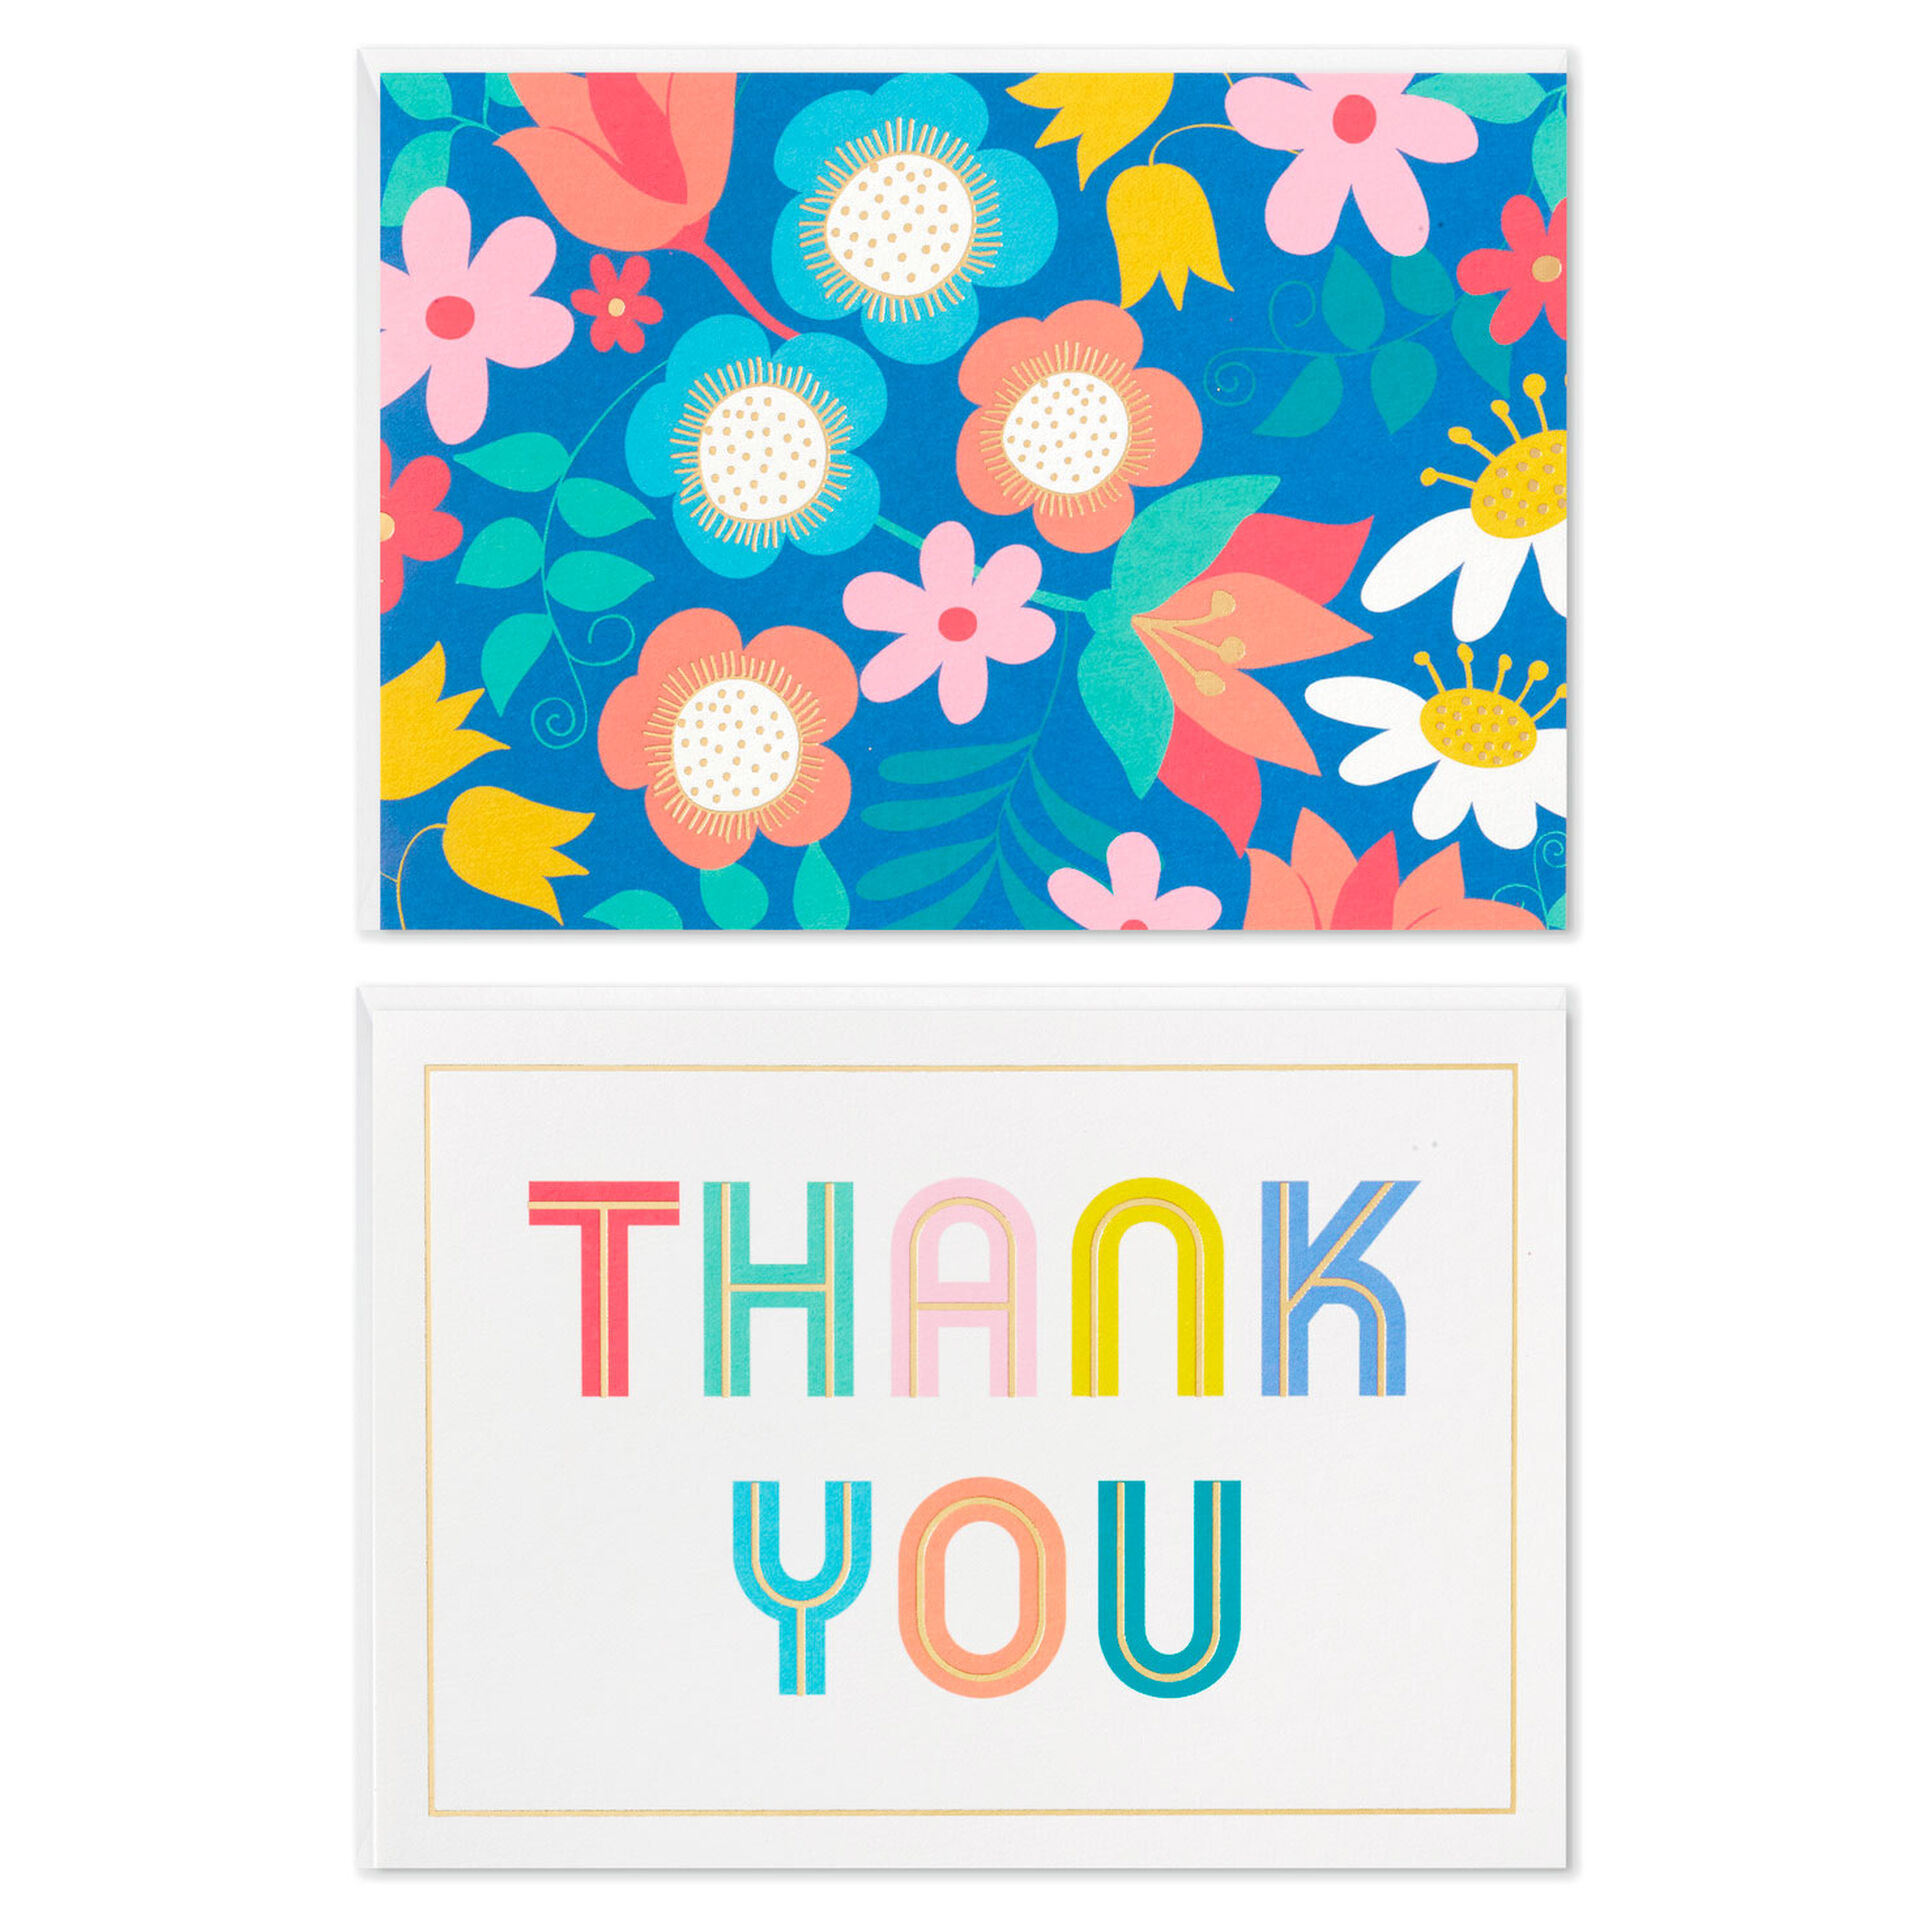 Floral-and-Lettering-Bulk-Blank-Note-Cards-Assortment_1399WTU1087_02